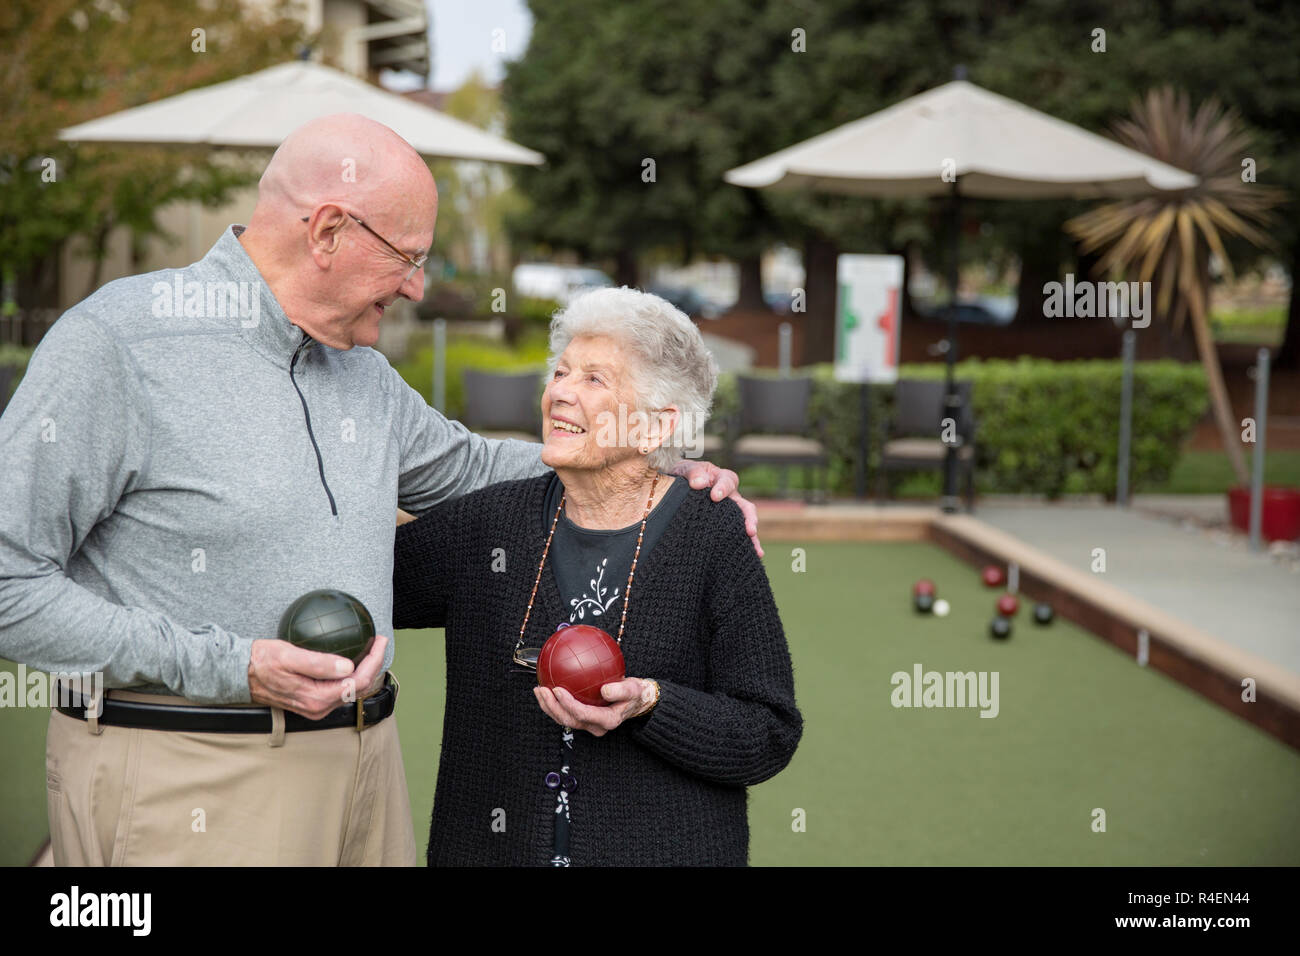 Senior Couple Looking Each Other While Holding Bowling Balls Stock Photo